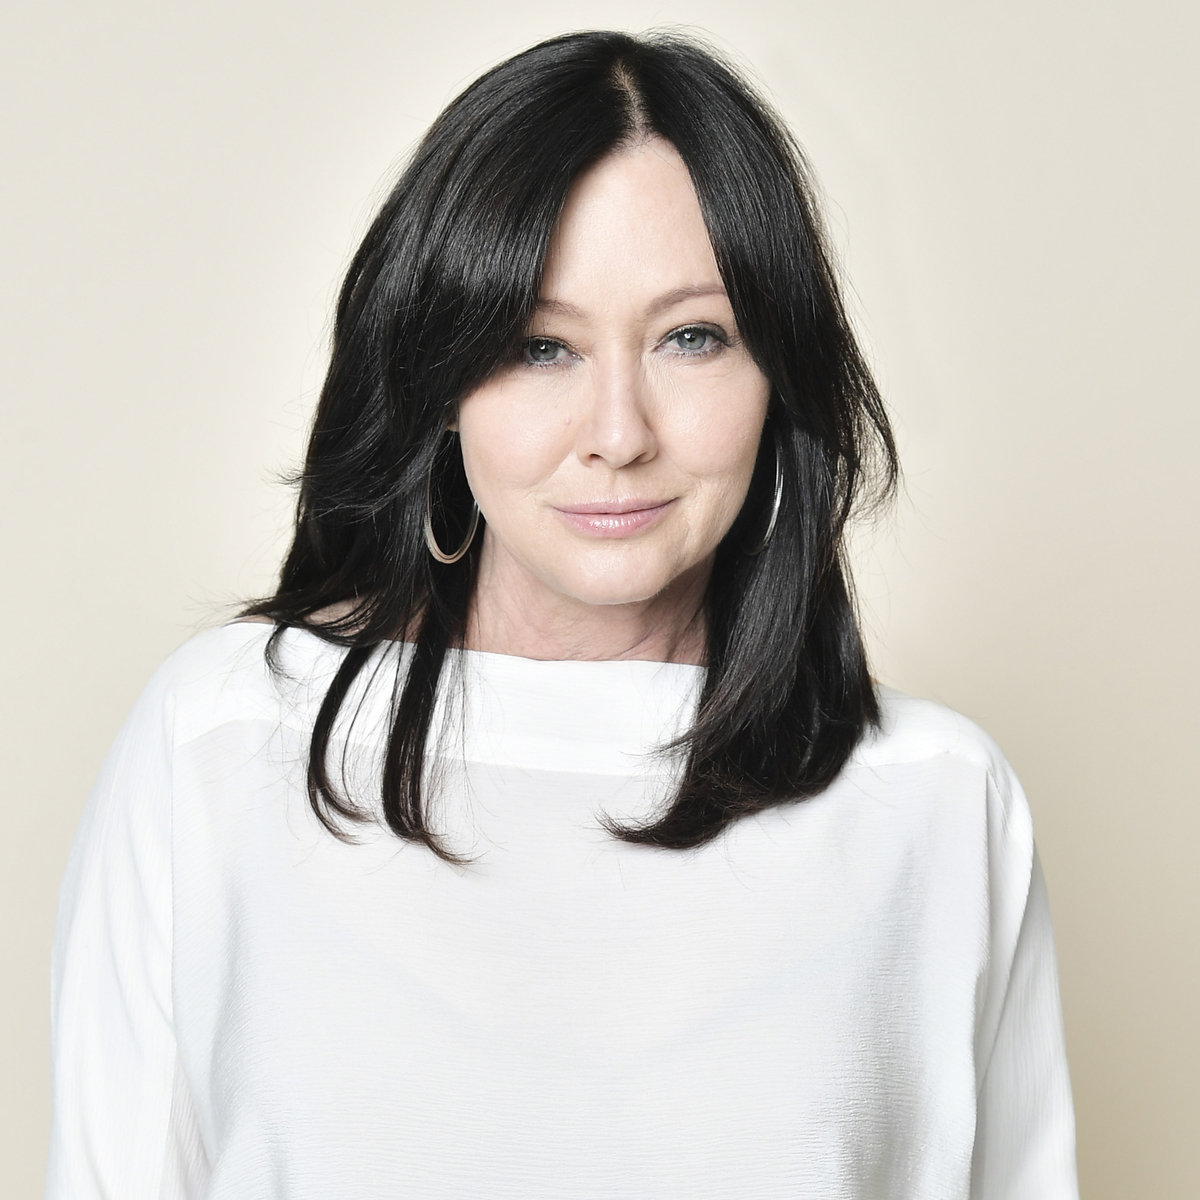 Shannen Doherty Details “Horrible Reaction” After Brain Tumor Surgery